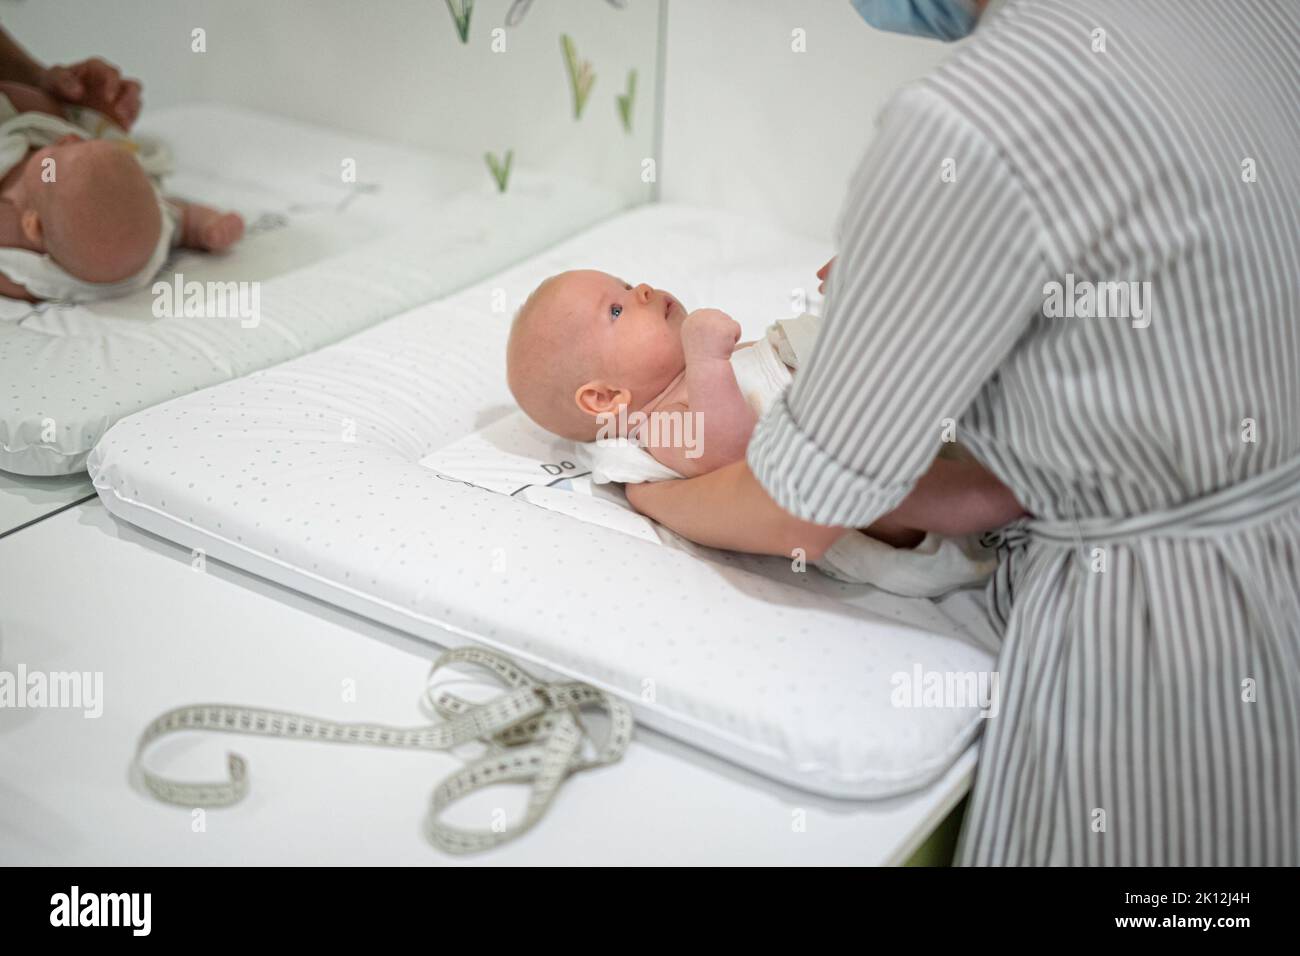 Baby lying on his back being messured during a standard medical checkup. Stock Photo